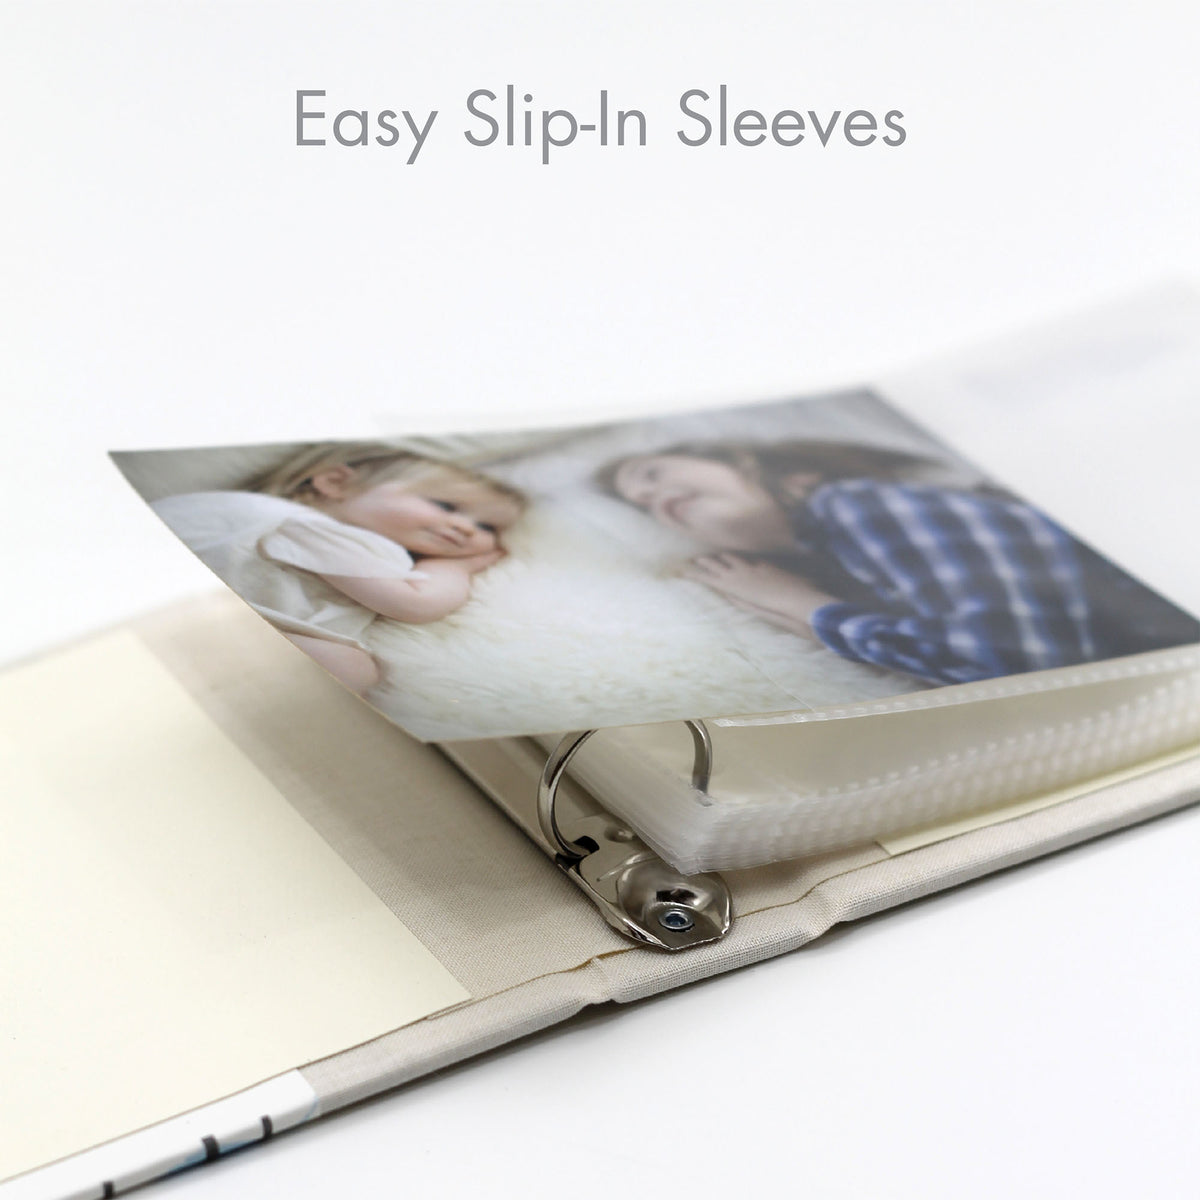 Small Photo Binder | Printed Cover: Blue Giraffe | 4x6 Photos | Available Personalized